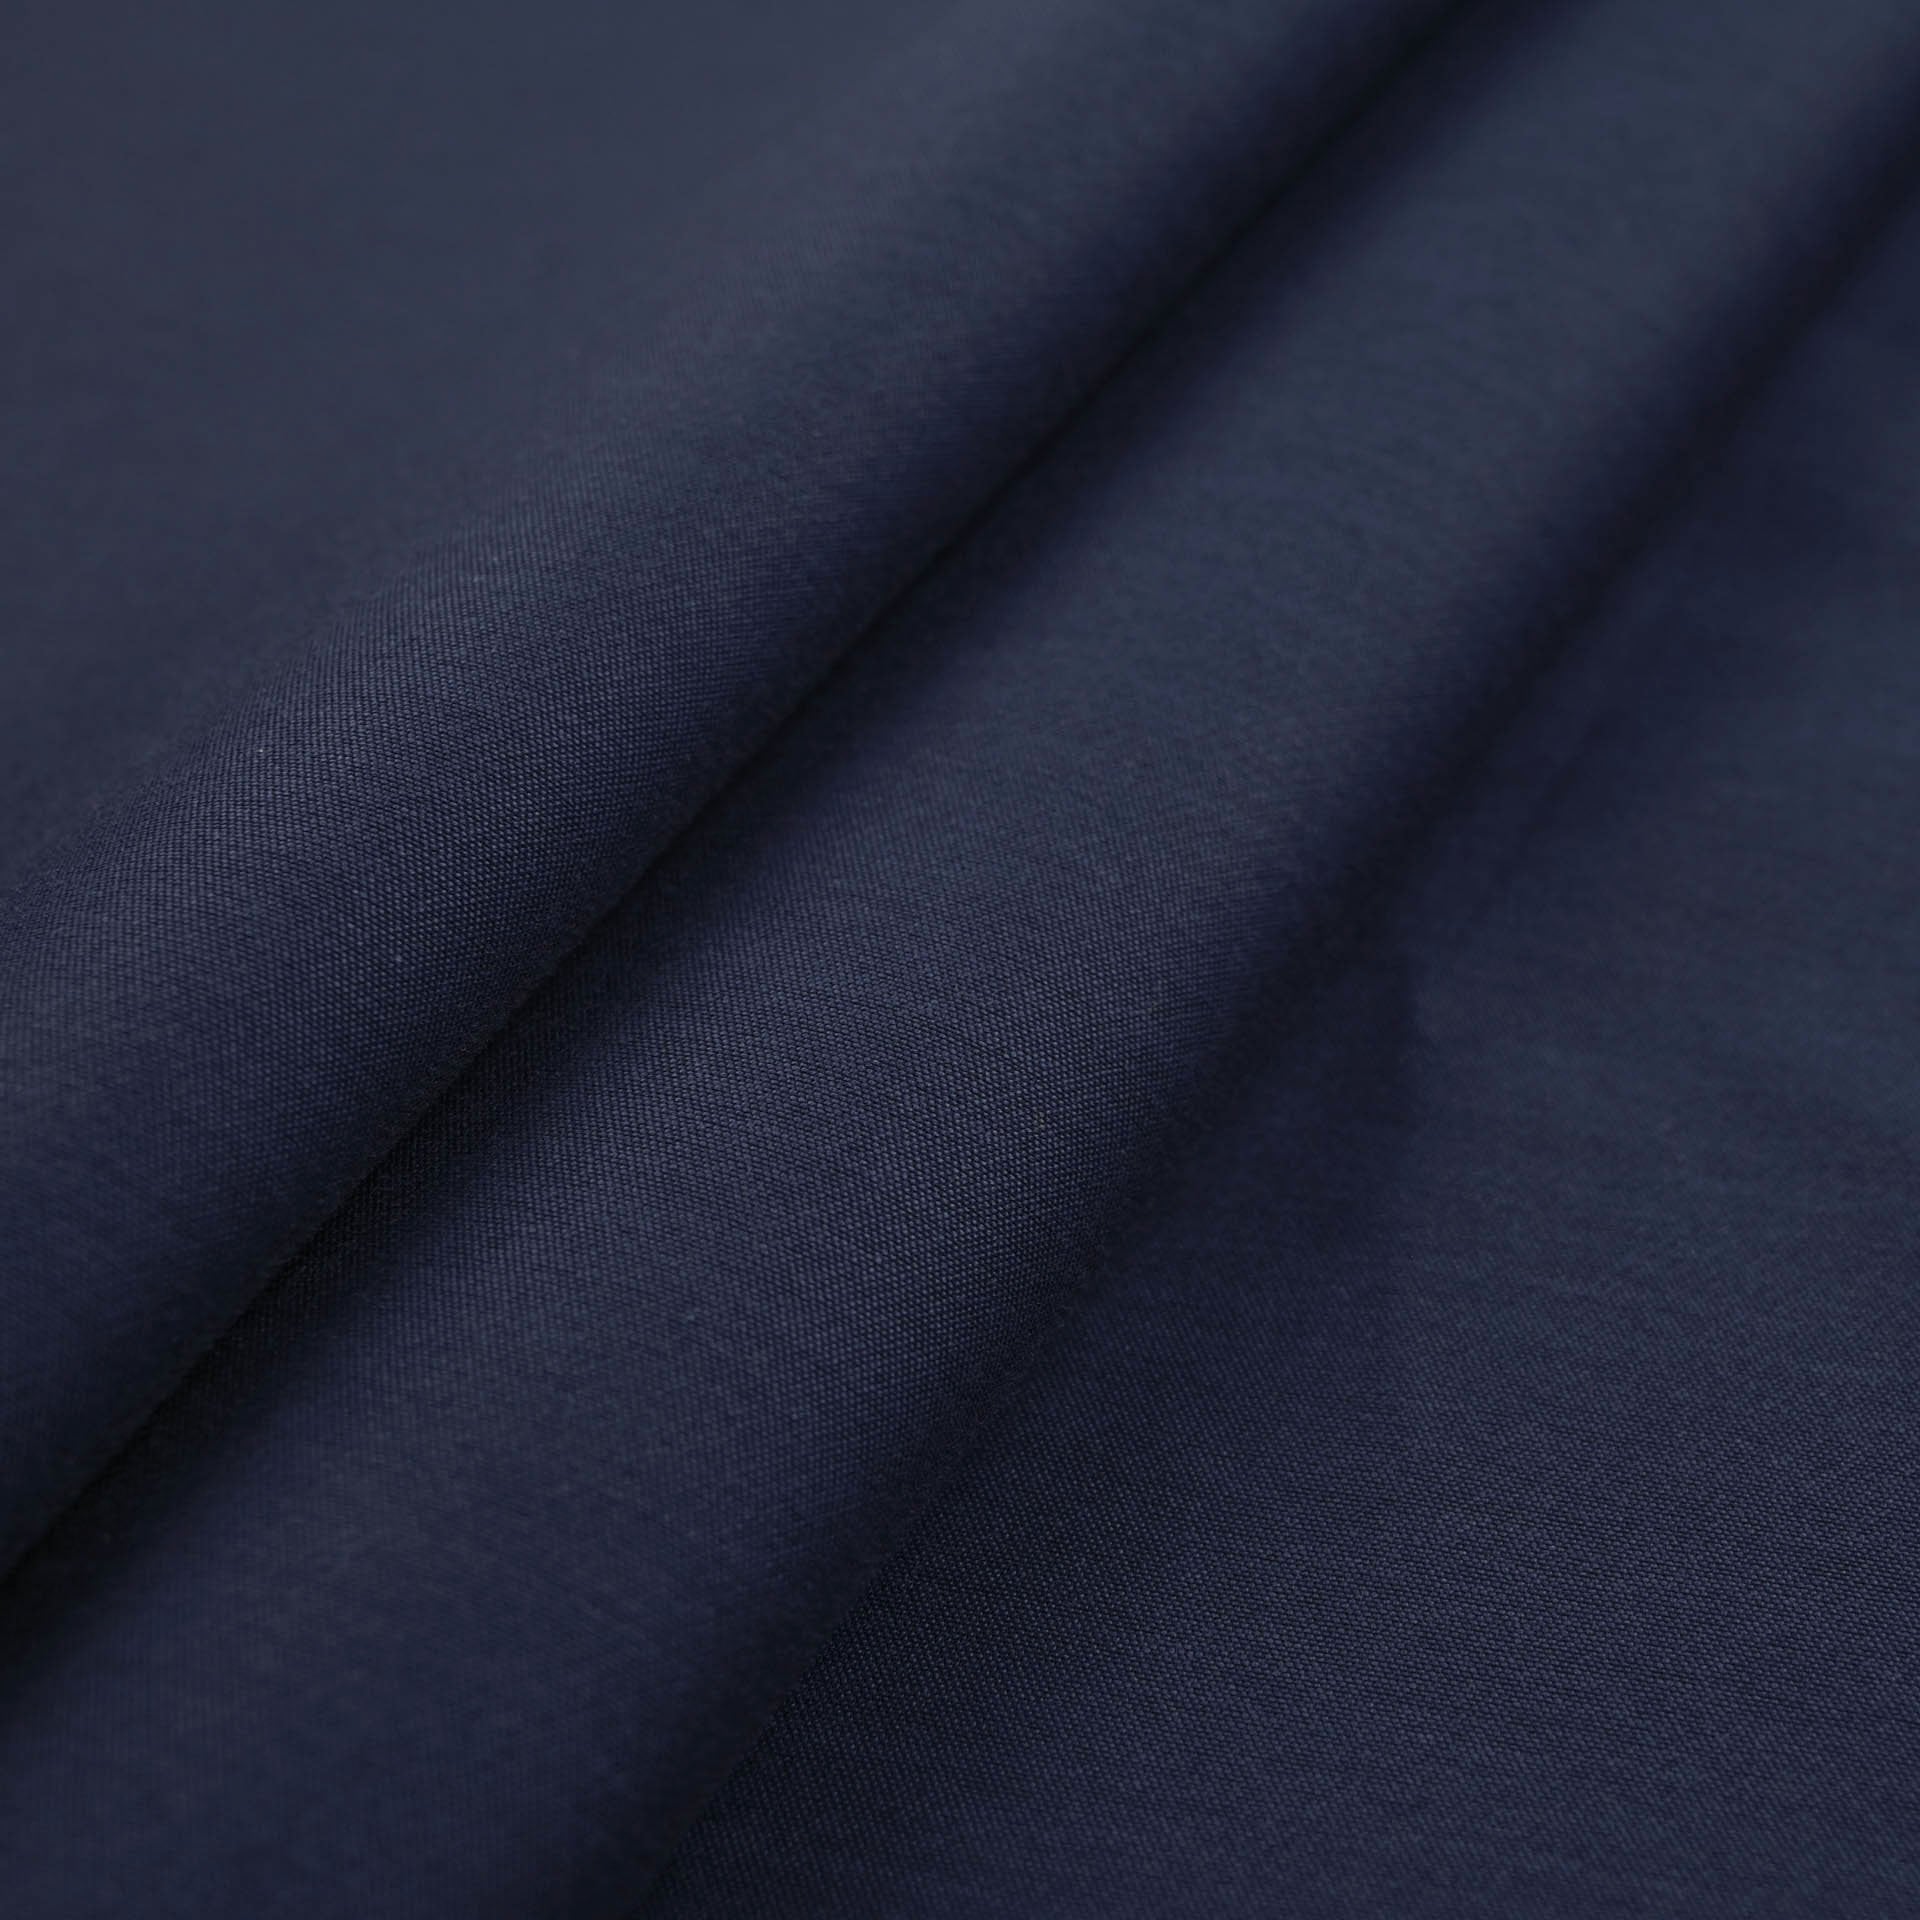 Blue Suiting Fabric 96907